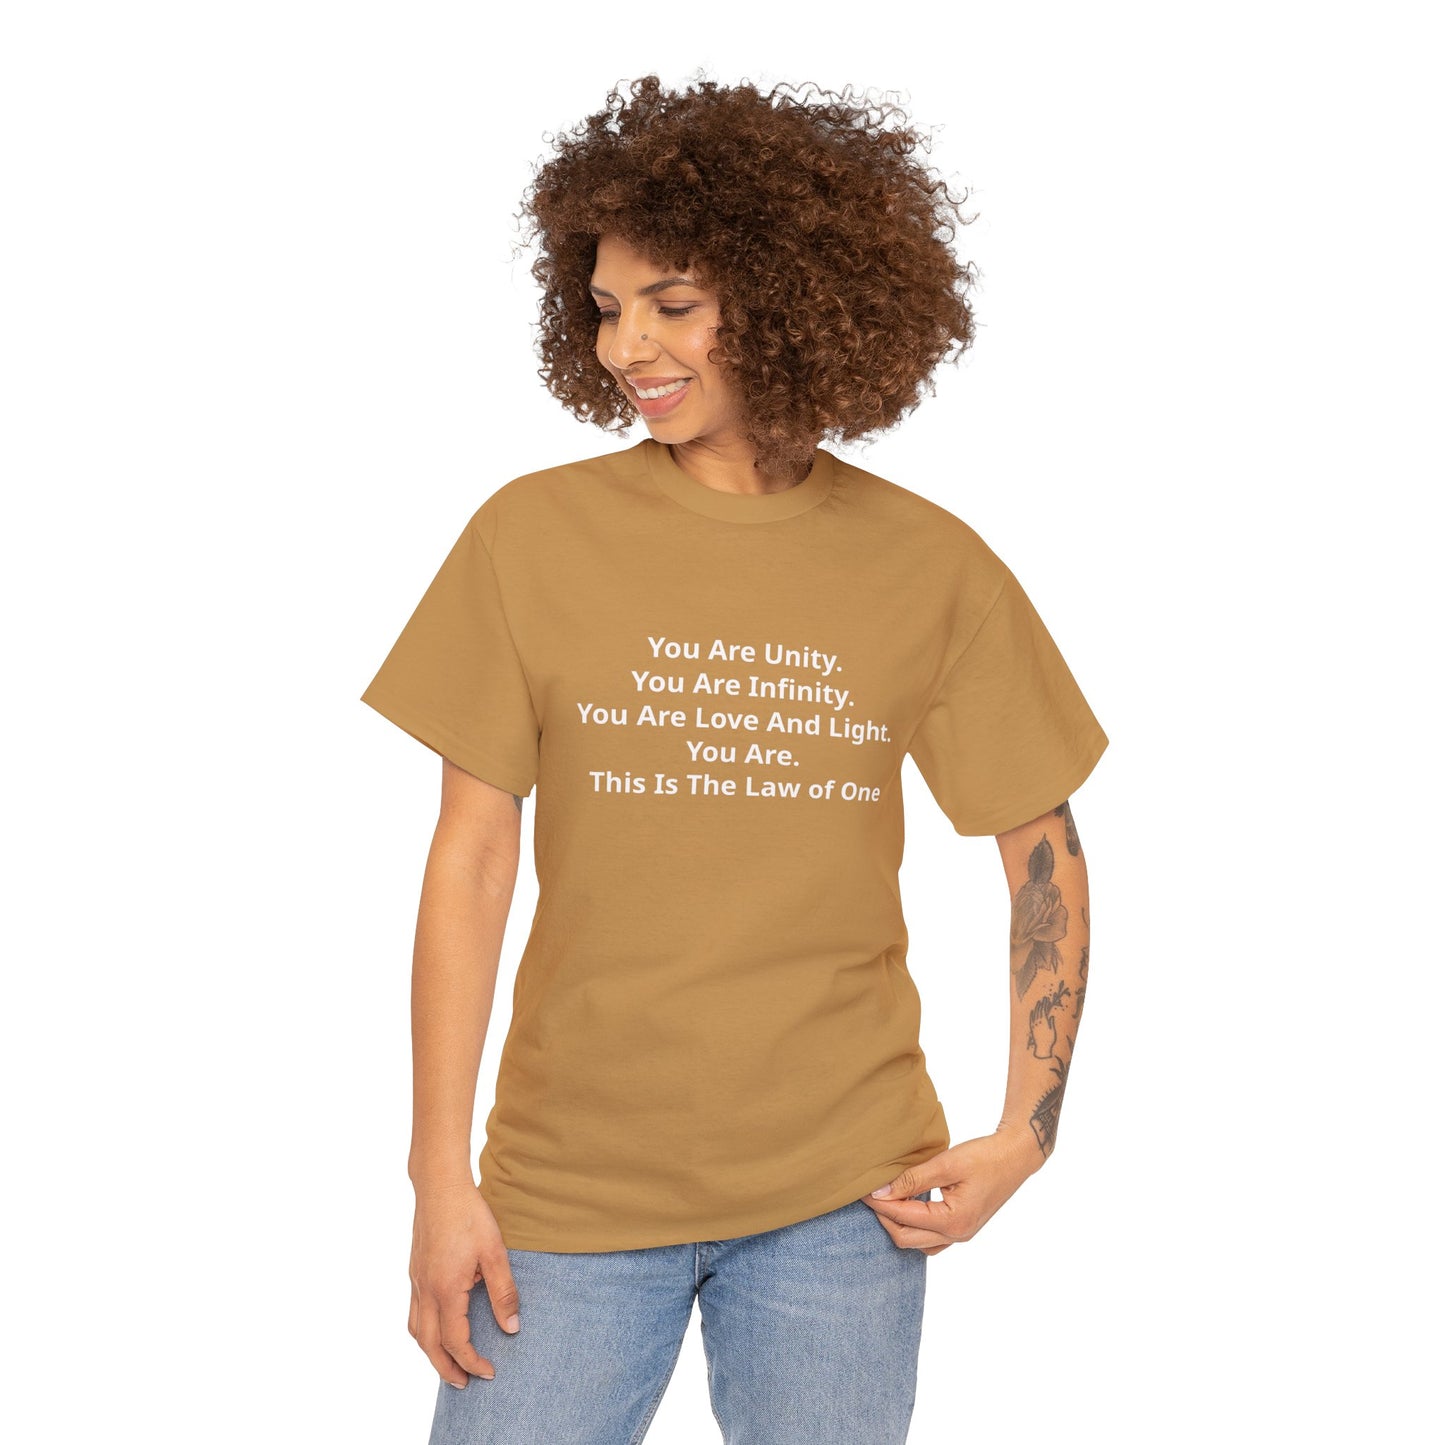 You Are Unity. You Are Infinity. You Are Love And Light. You Are. This Is The Law of One Cotton T-Shirt